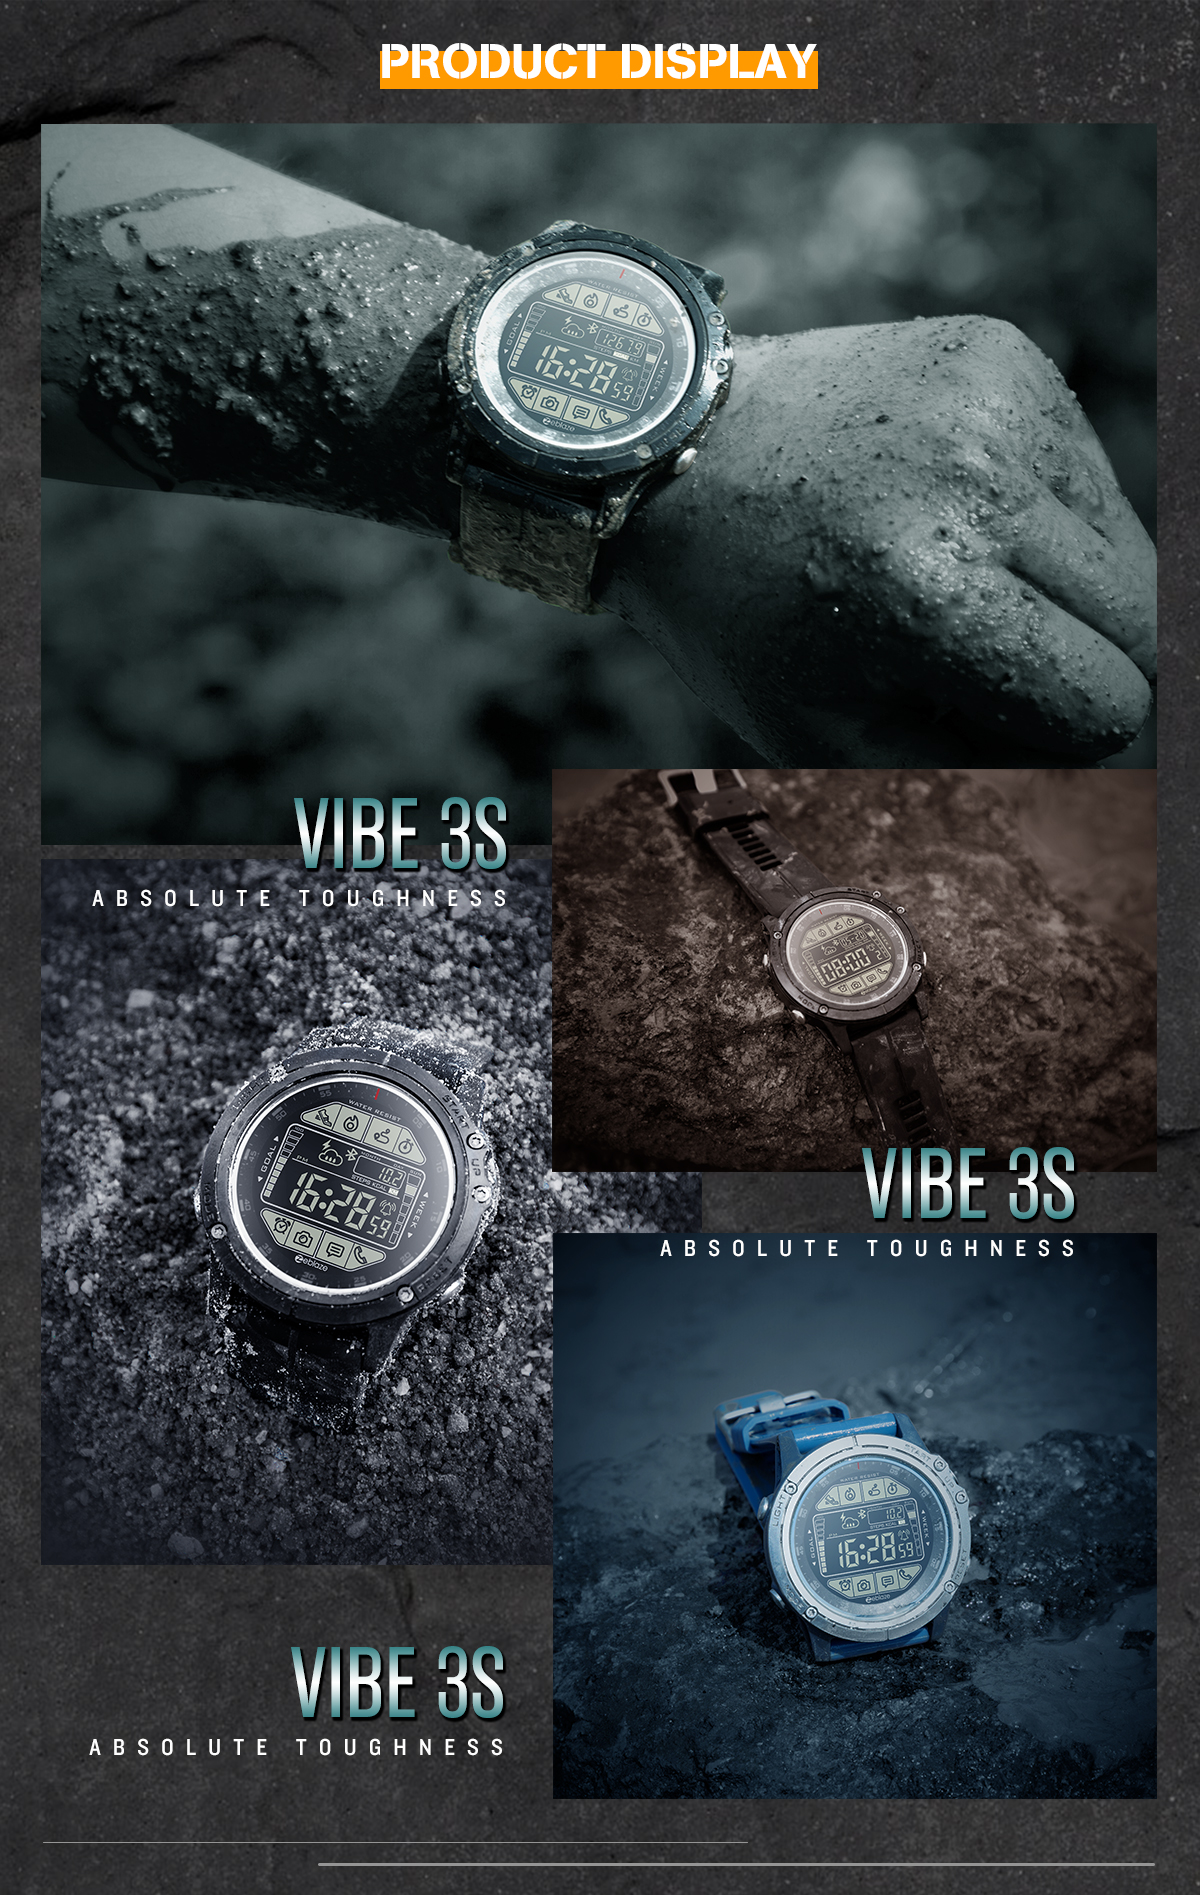 Zeblaze VIBE 3S Absolute Toughness Real-time Weather Display Goals Setting Message Reminder 1.24inch FSTN Full View Display Outdoor Sport Smart Watch 26